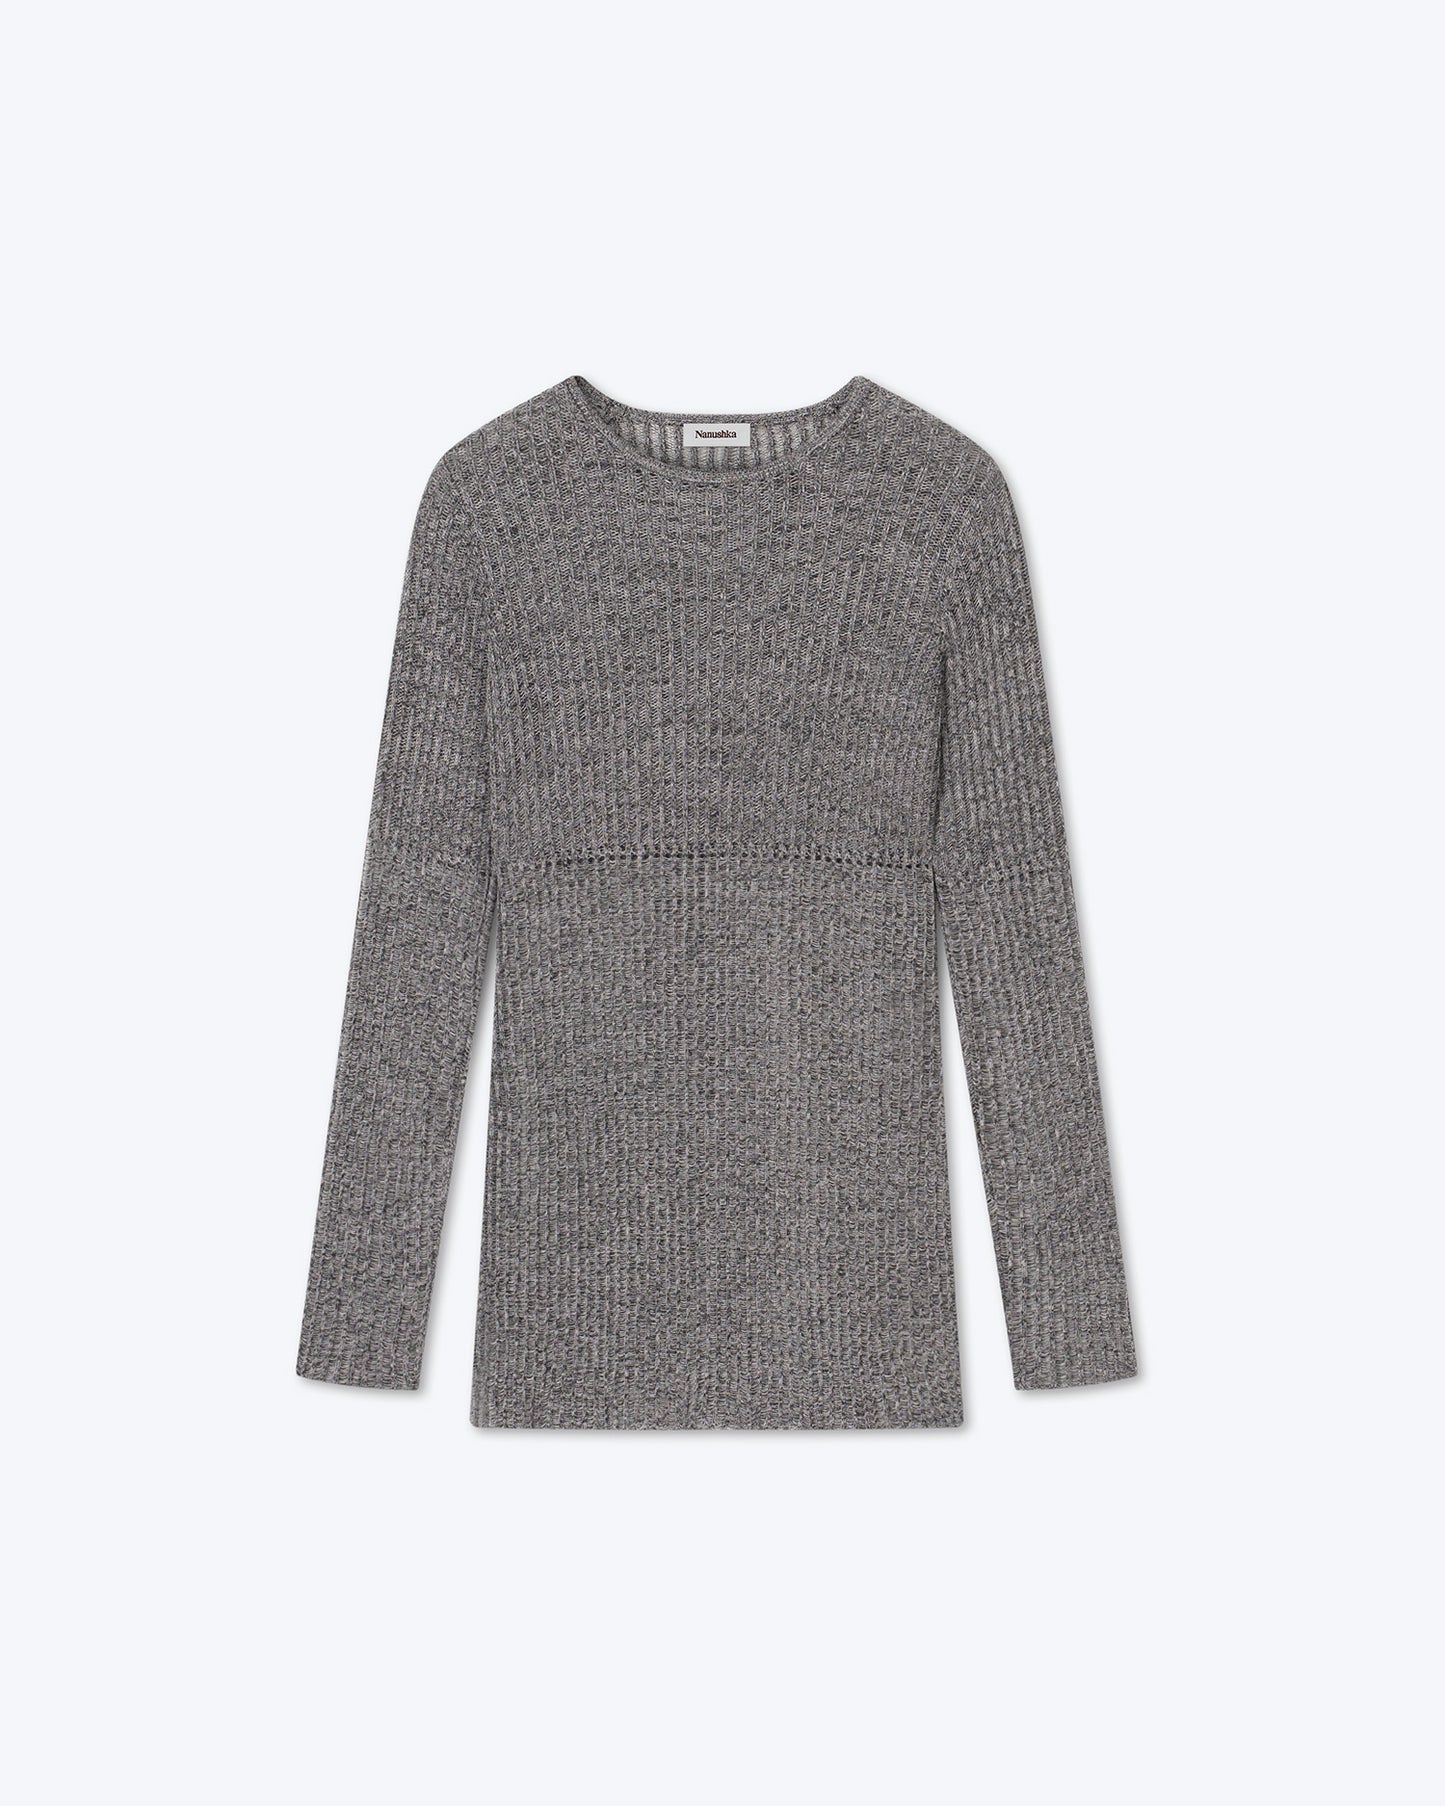 Cemile - Ribbed-Knit Sweater - Mottled Black